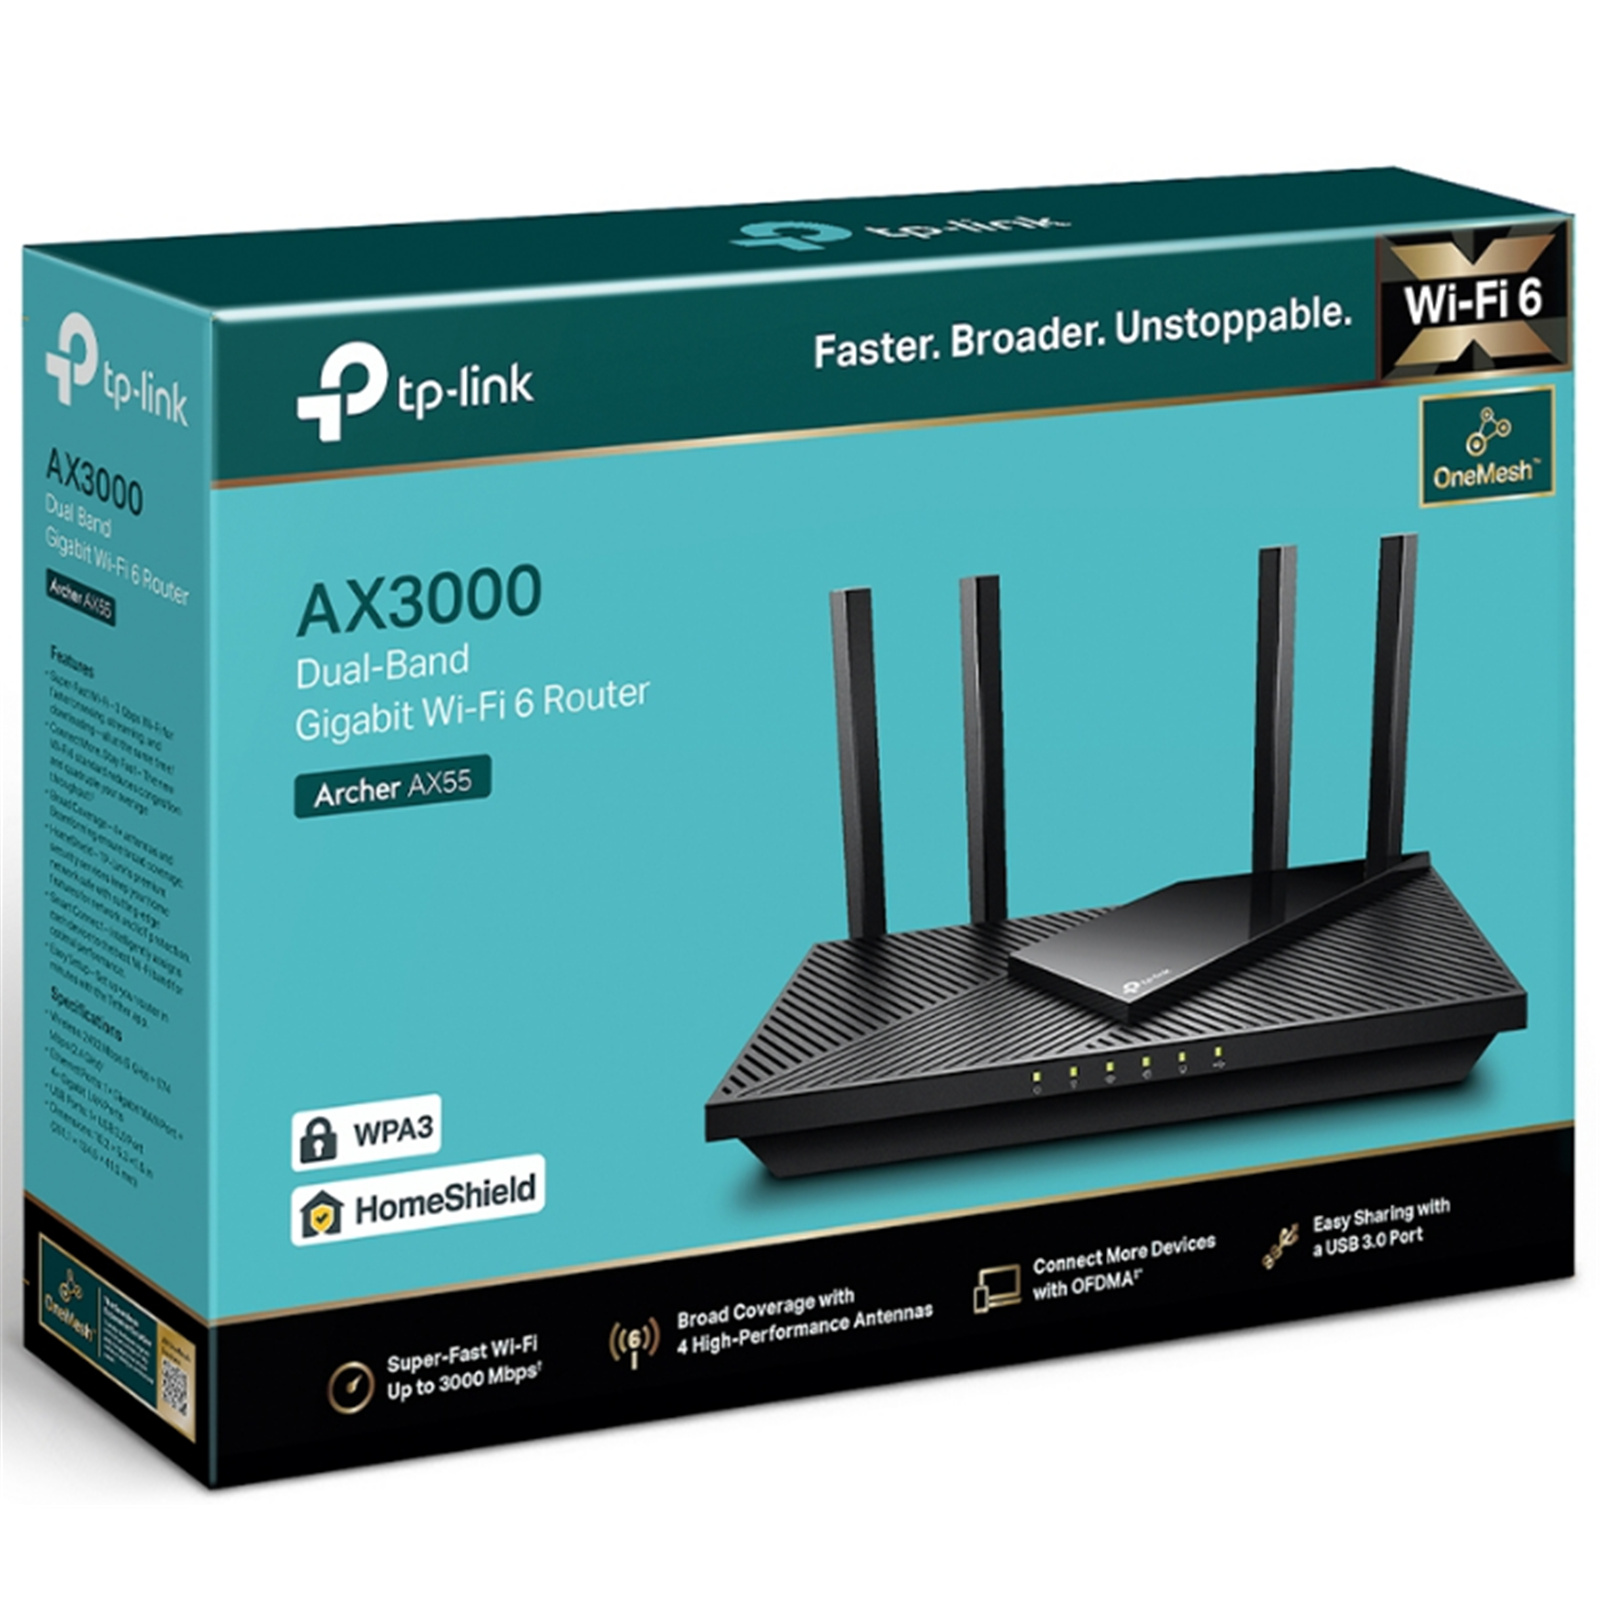 Buy the TP-Link Archer AX55 MU-MIMO Gigabit Wi-Fi Router, Dual-Band AX3000,  1... ( ARCHER AX55 ) online - PBTech.com/pacific